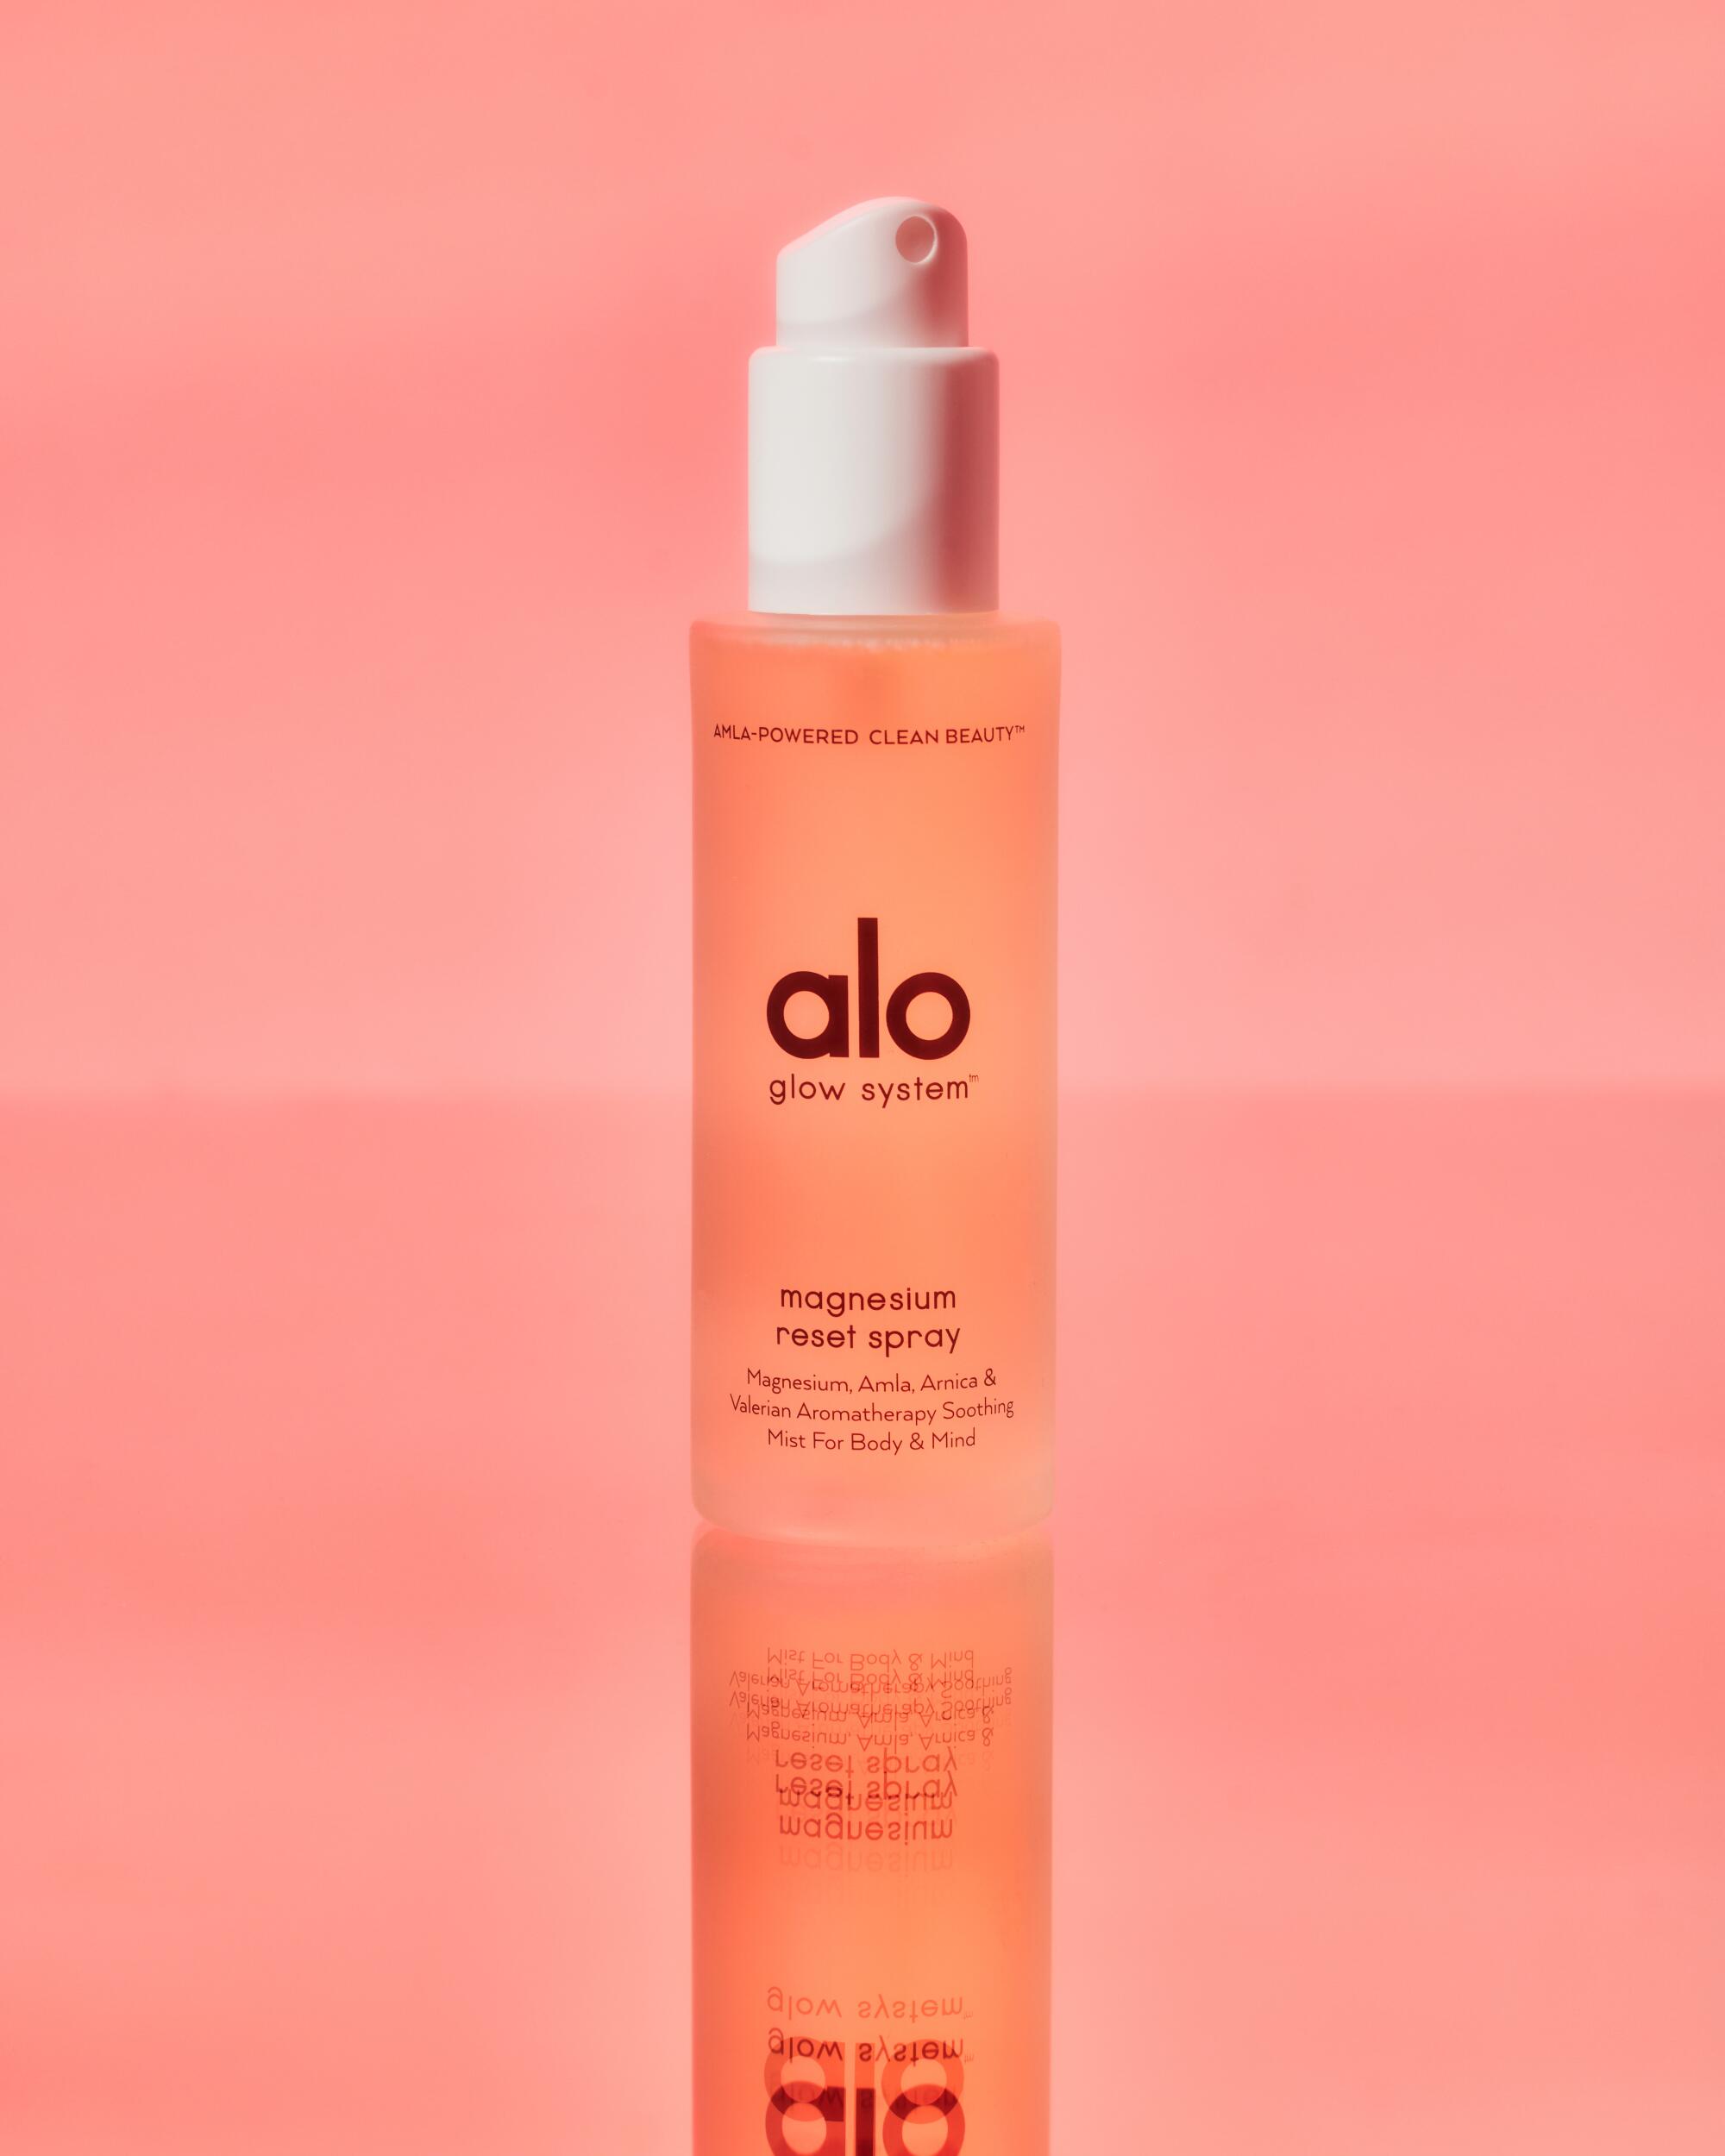 Magnesium Reset Spray by Alo Yoga, to spray on tense muscles or the soles of your feet before going to bed.